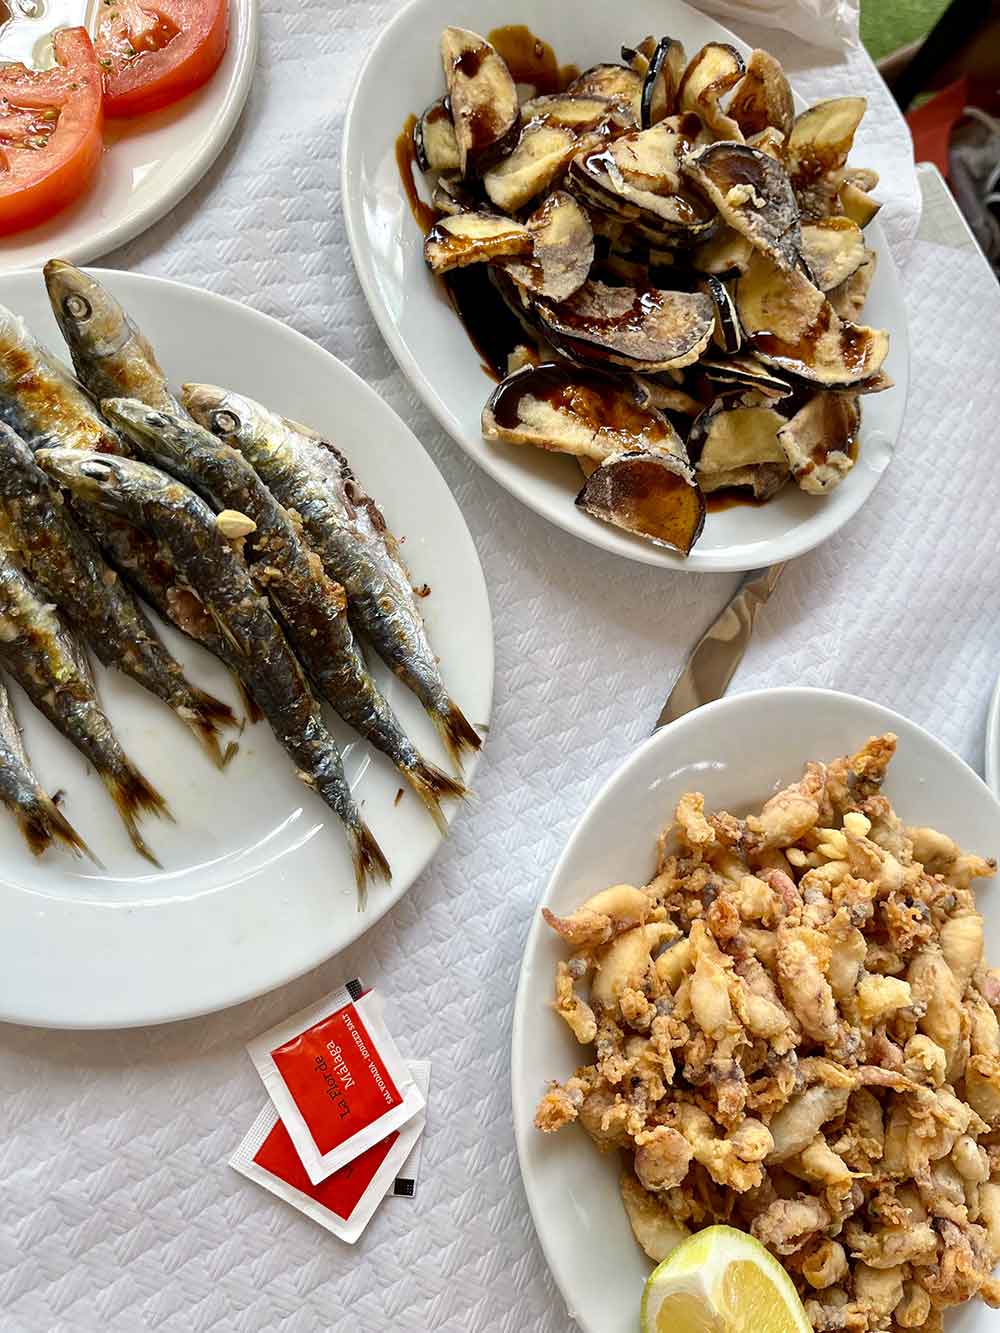 A plate of grilled sardines, fried squid and aubergines with sugar cane honey.